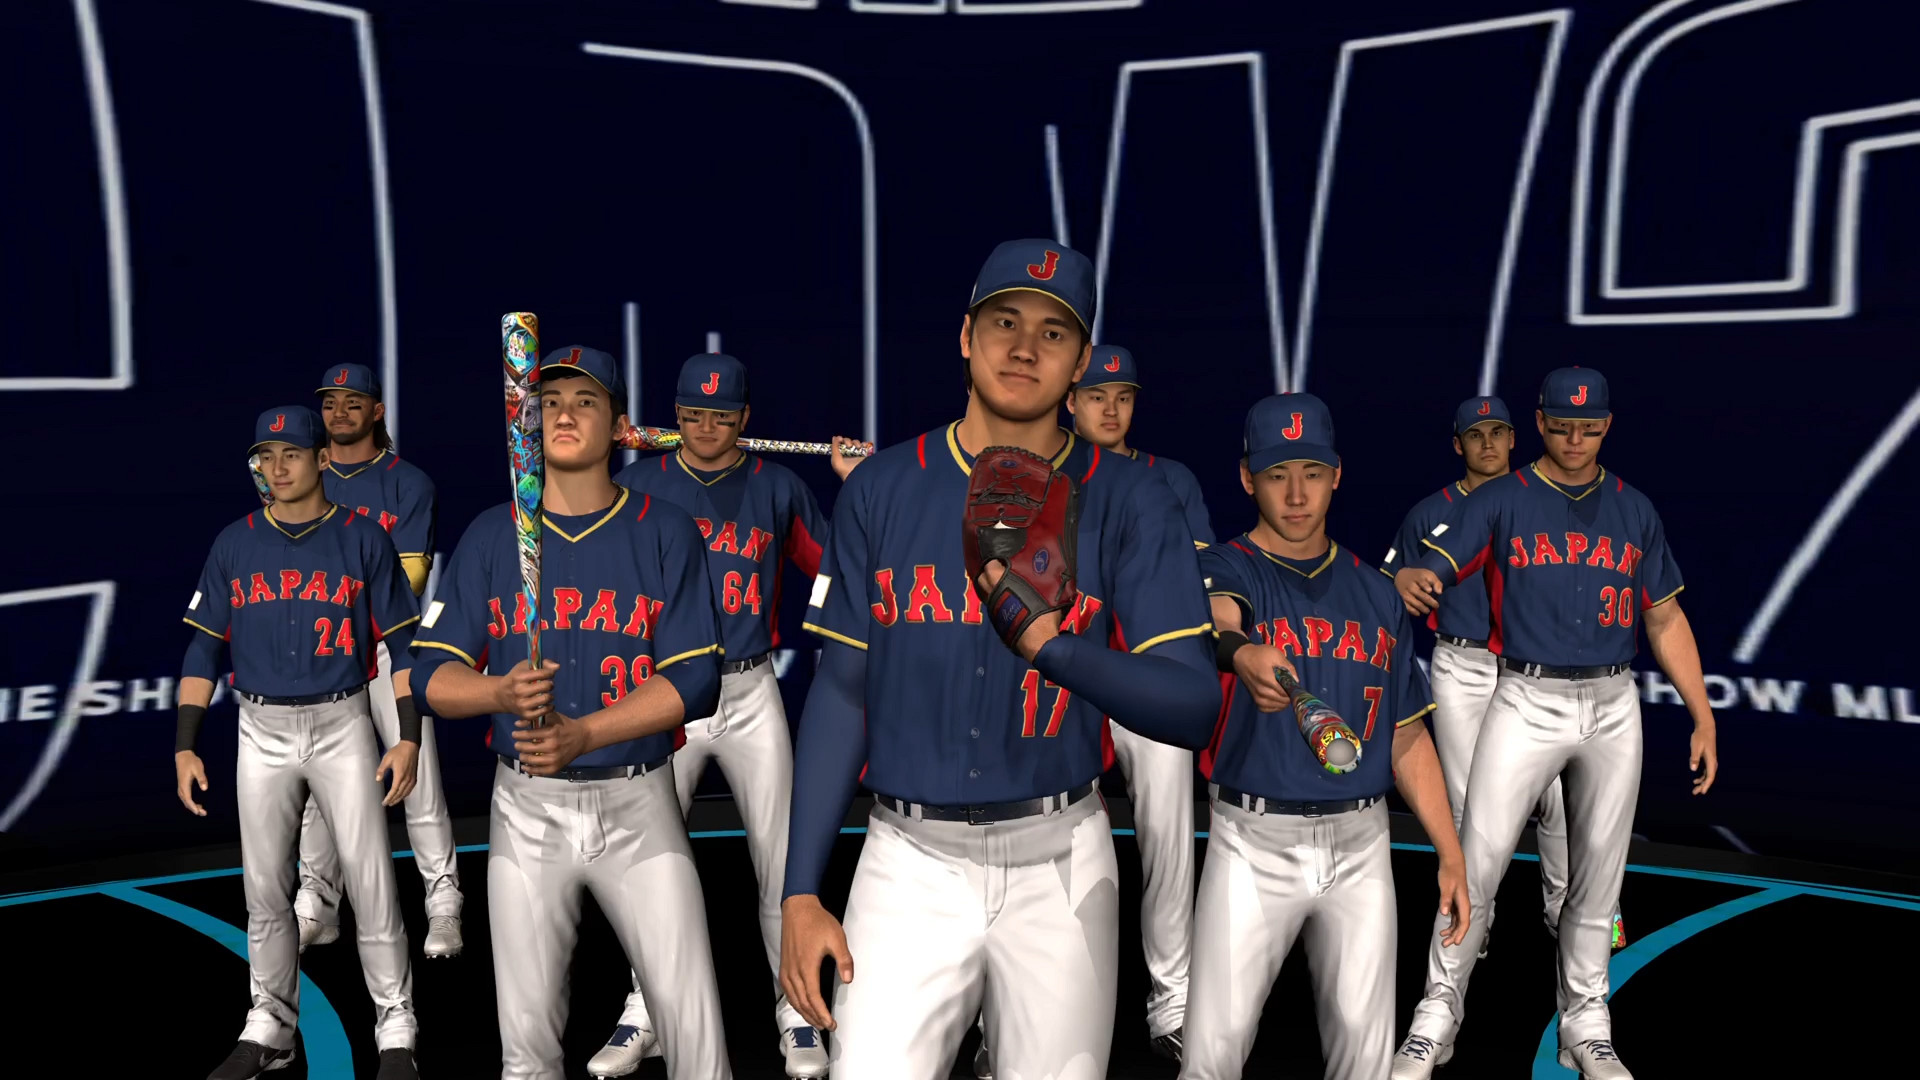 Sony Partners Reveal 10 New Legends Coming to MLB The Show 20